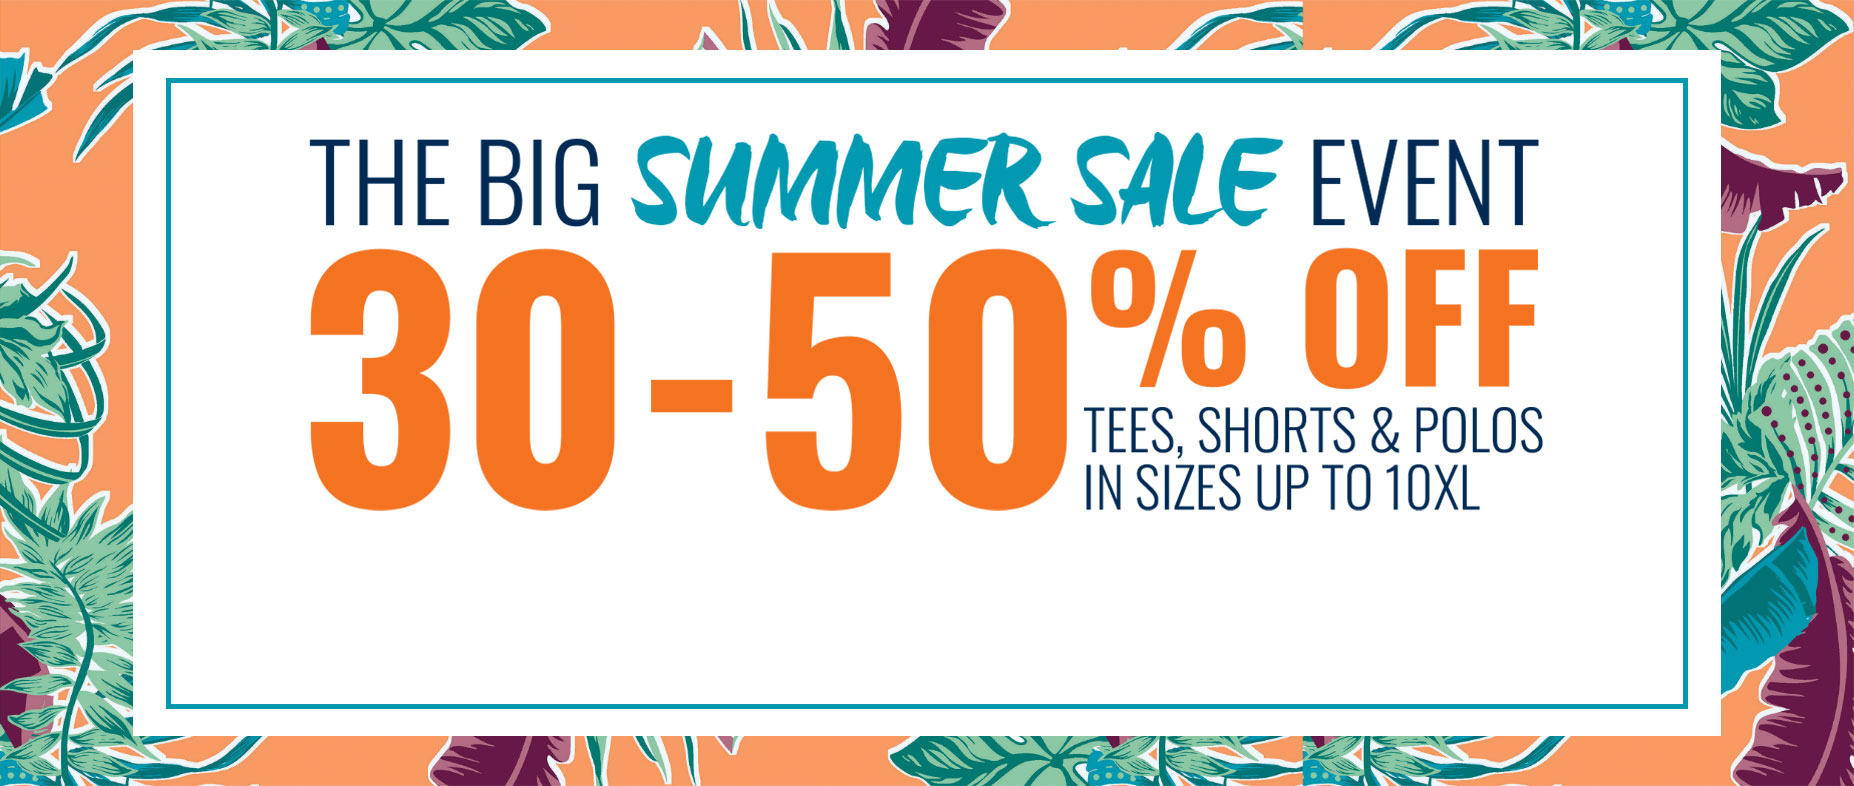 The big summer sale event